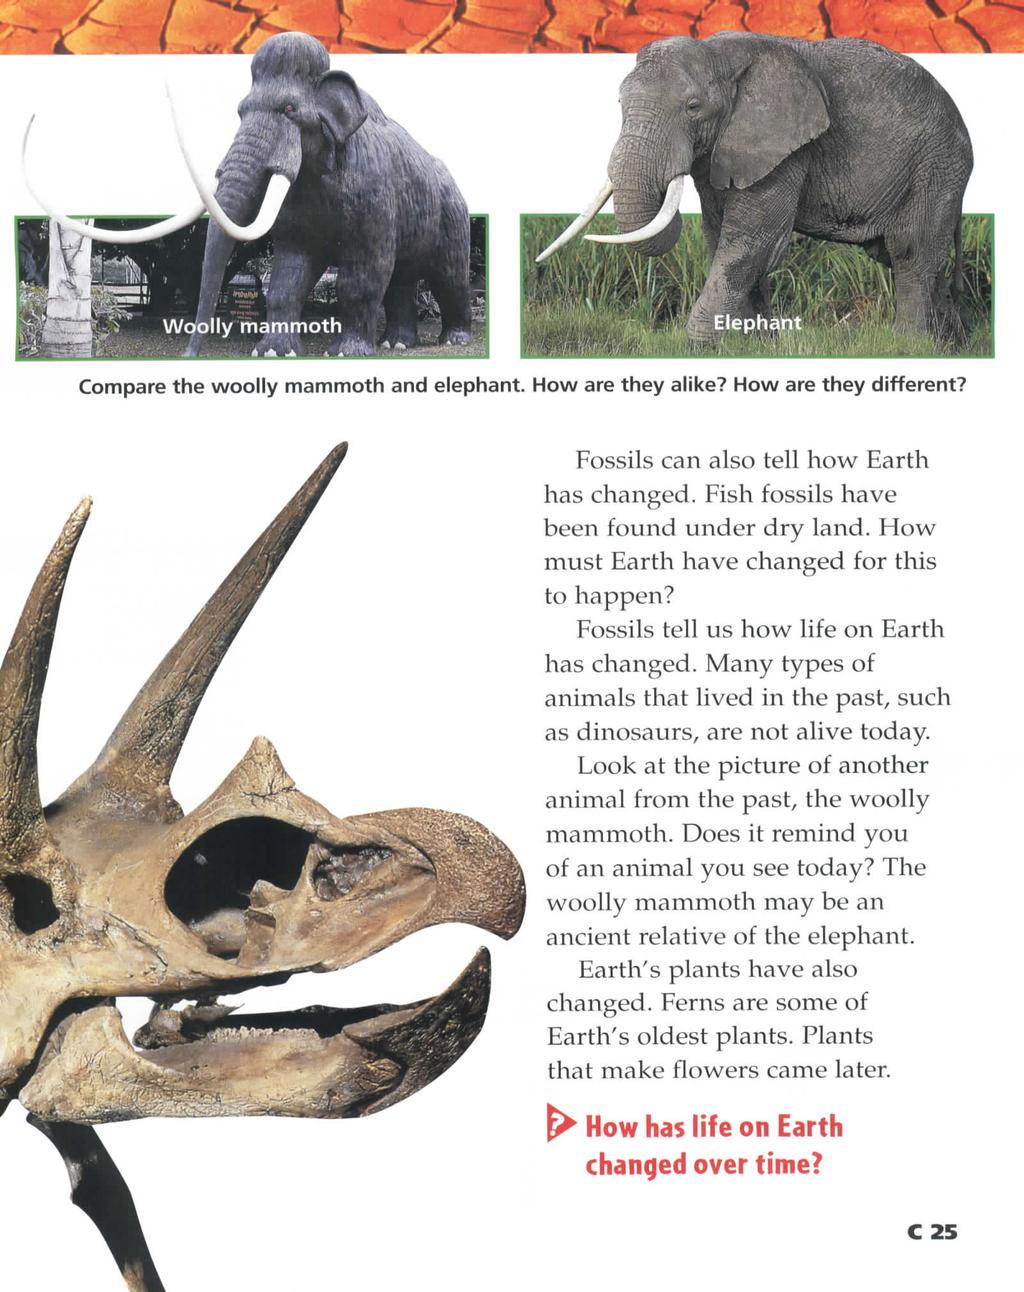 Compare the woolly mammoth and elephant. How are they alike? How are they different? Fossils can also tell how Earth has changed. Fish fossils have been found under dry land.